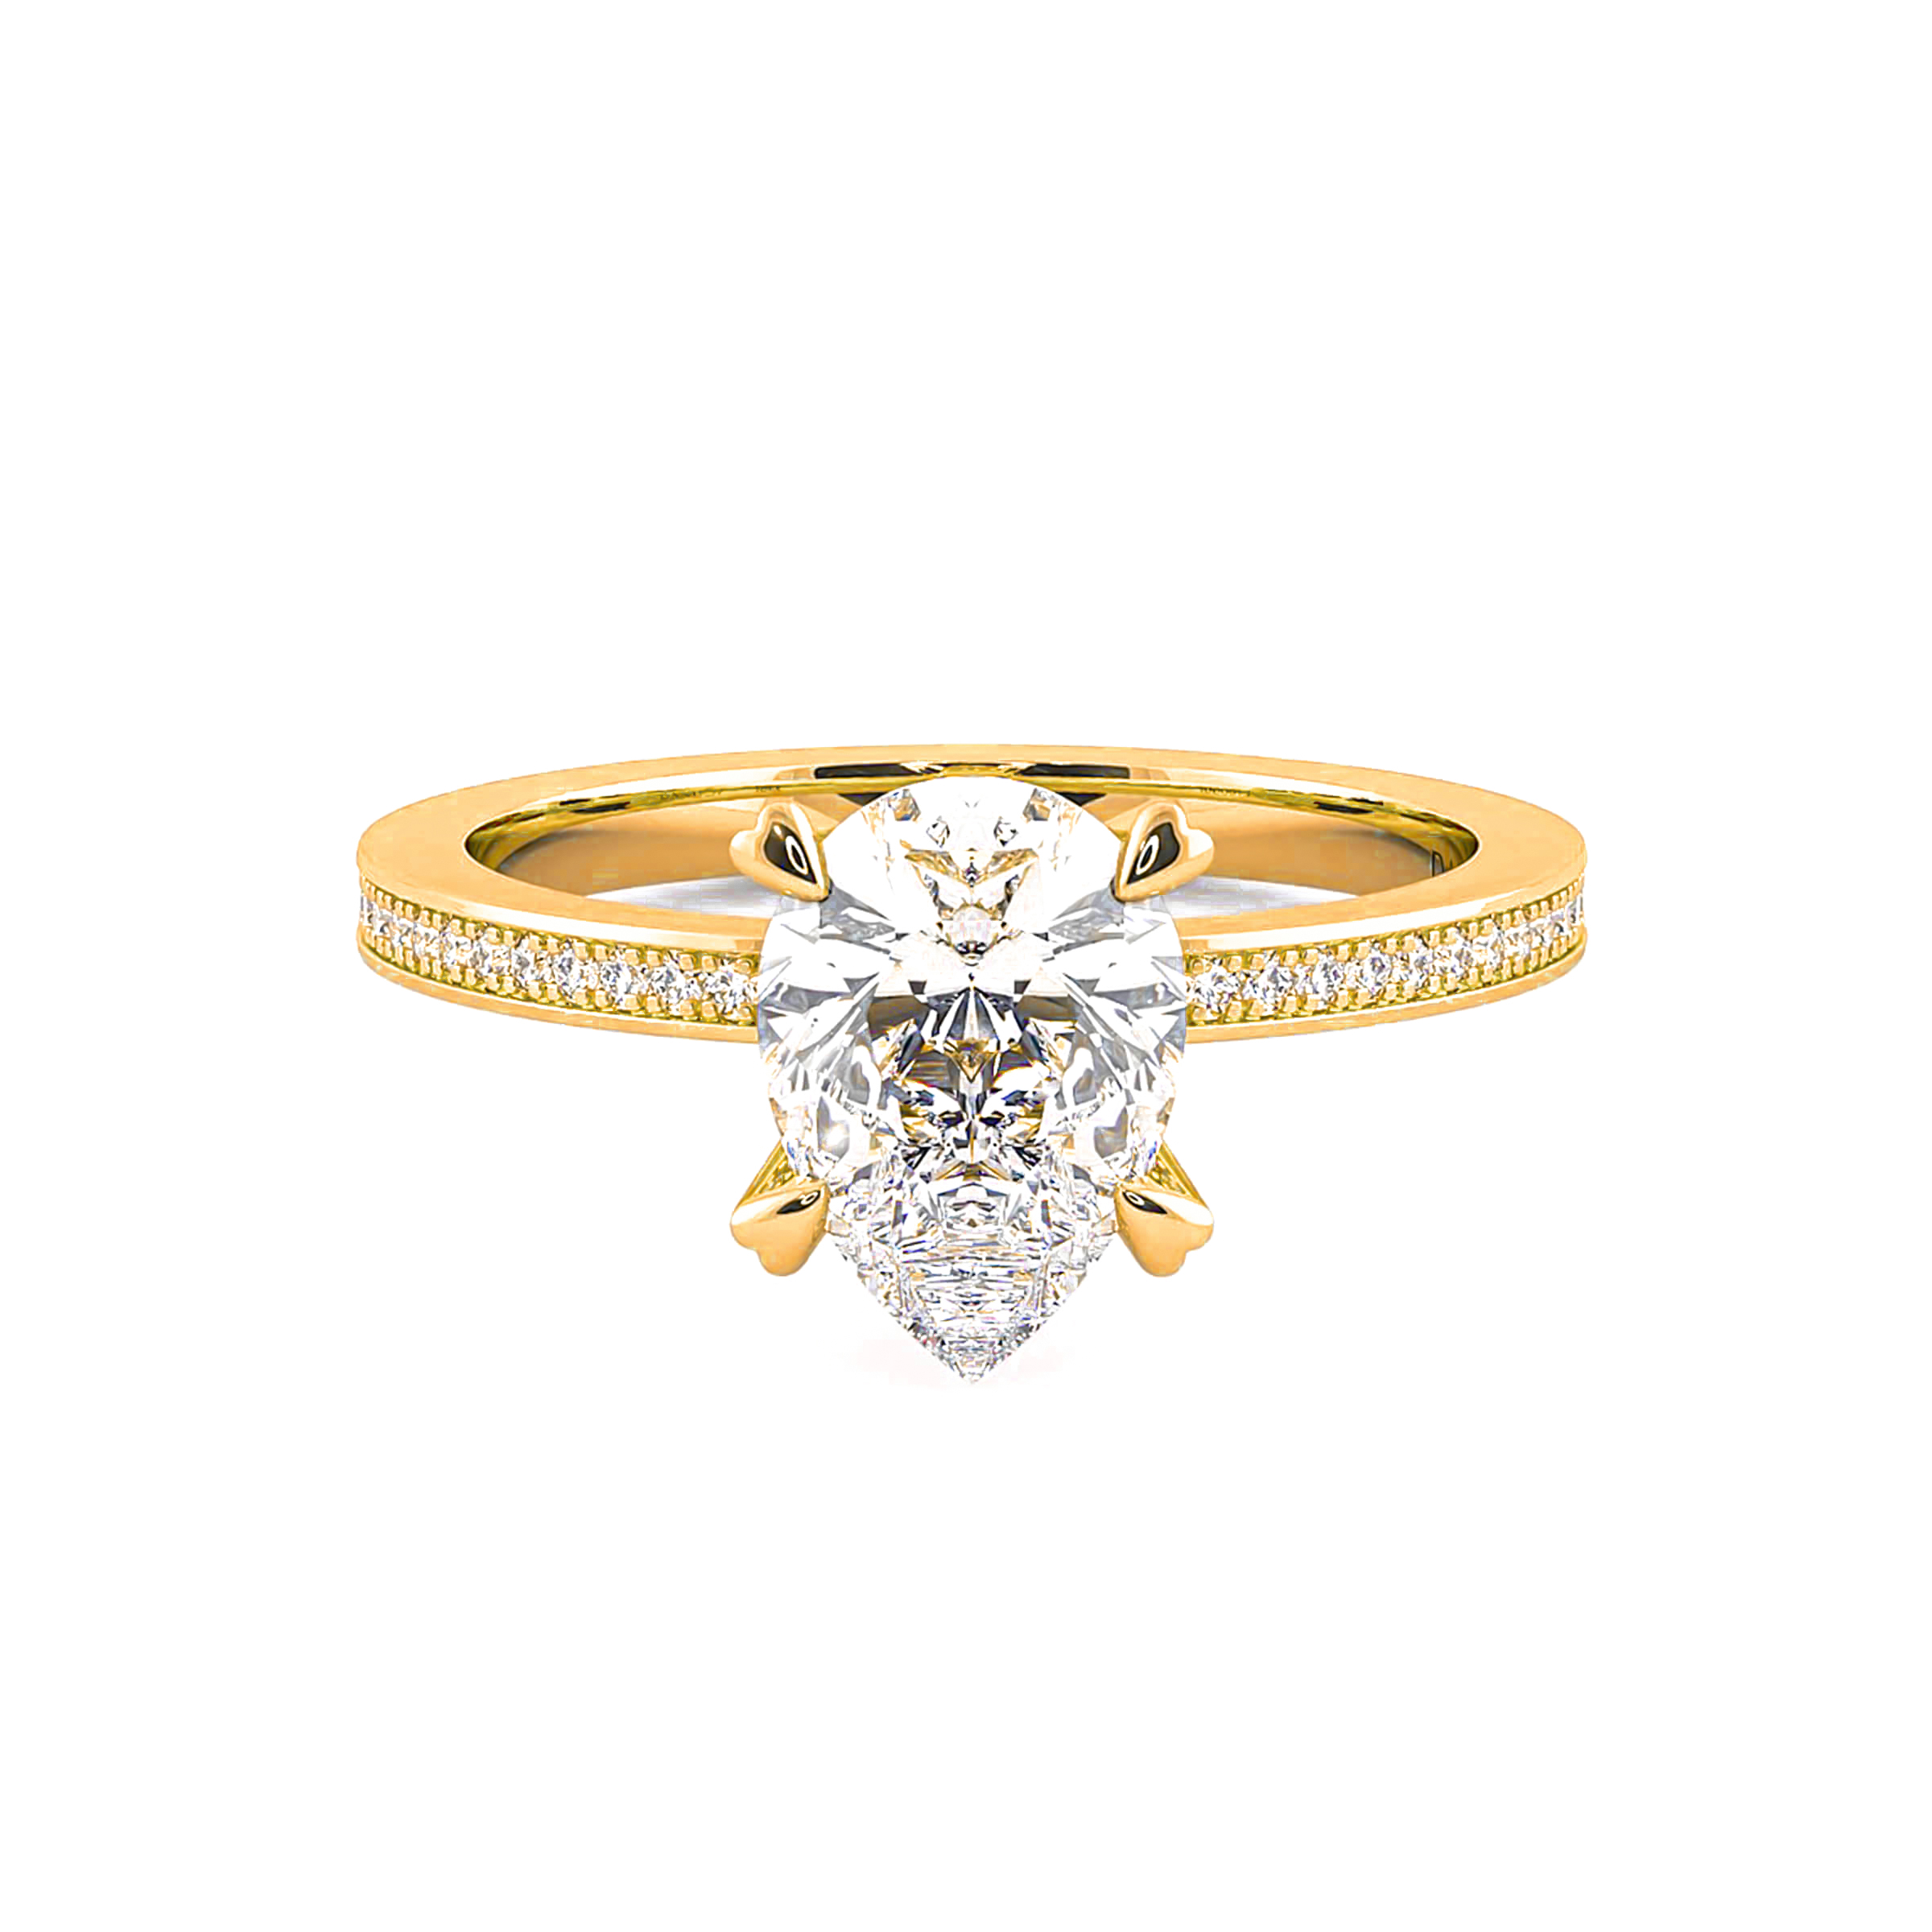 Darry Ring pear cut diamond engagement ring